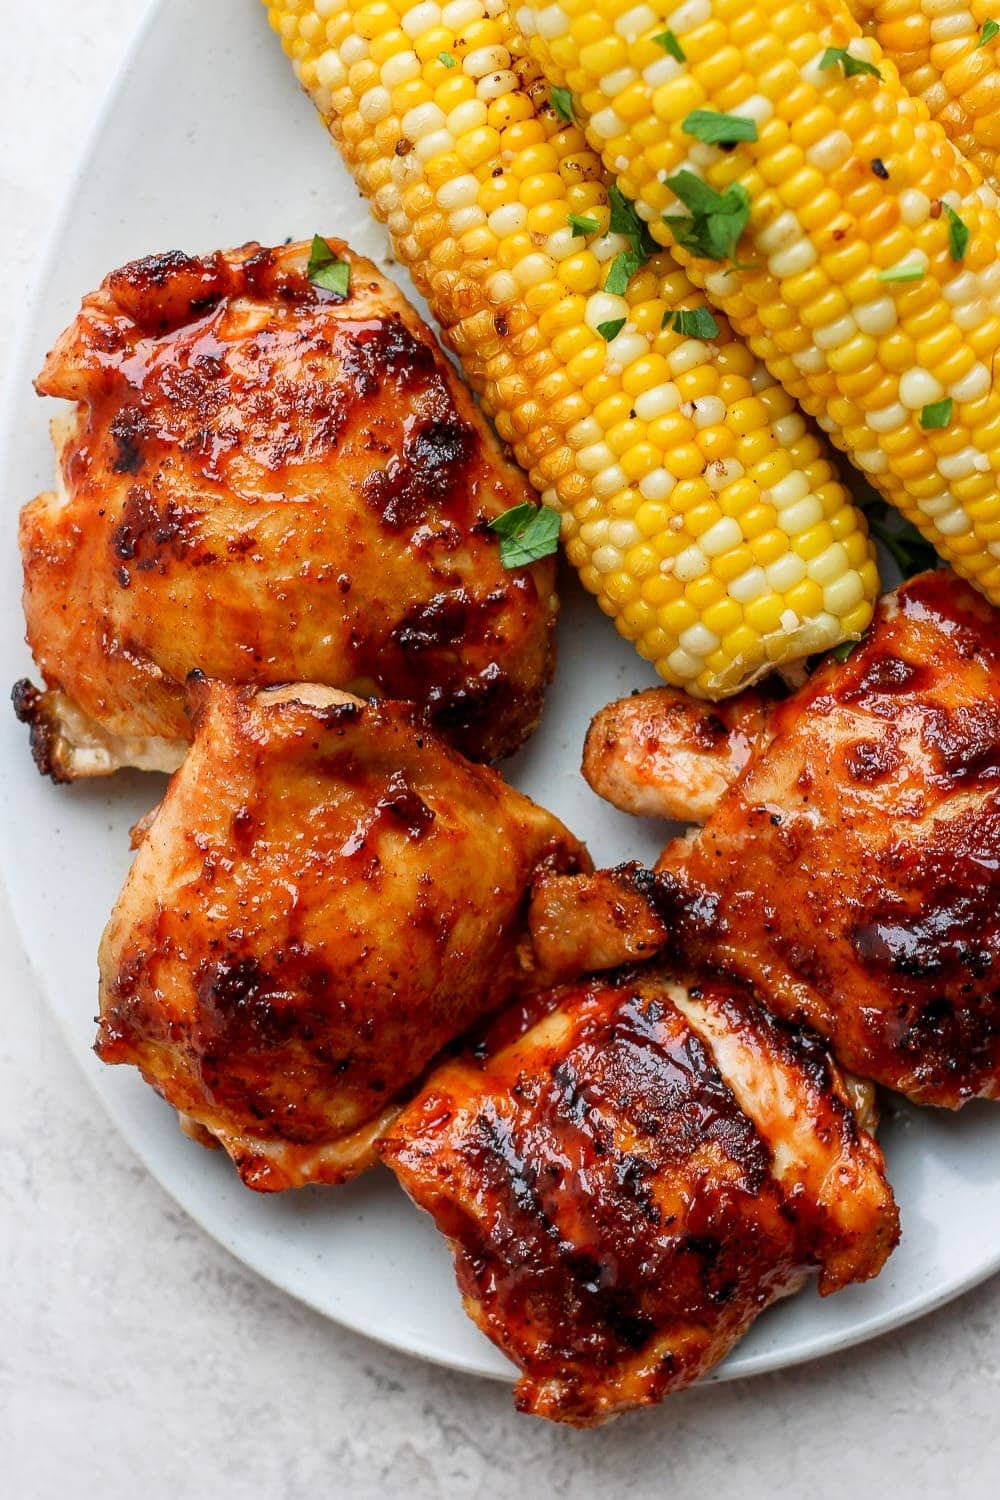 Chicken Thighs with Corn Cob